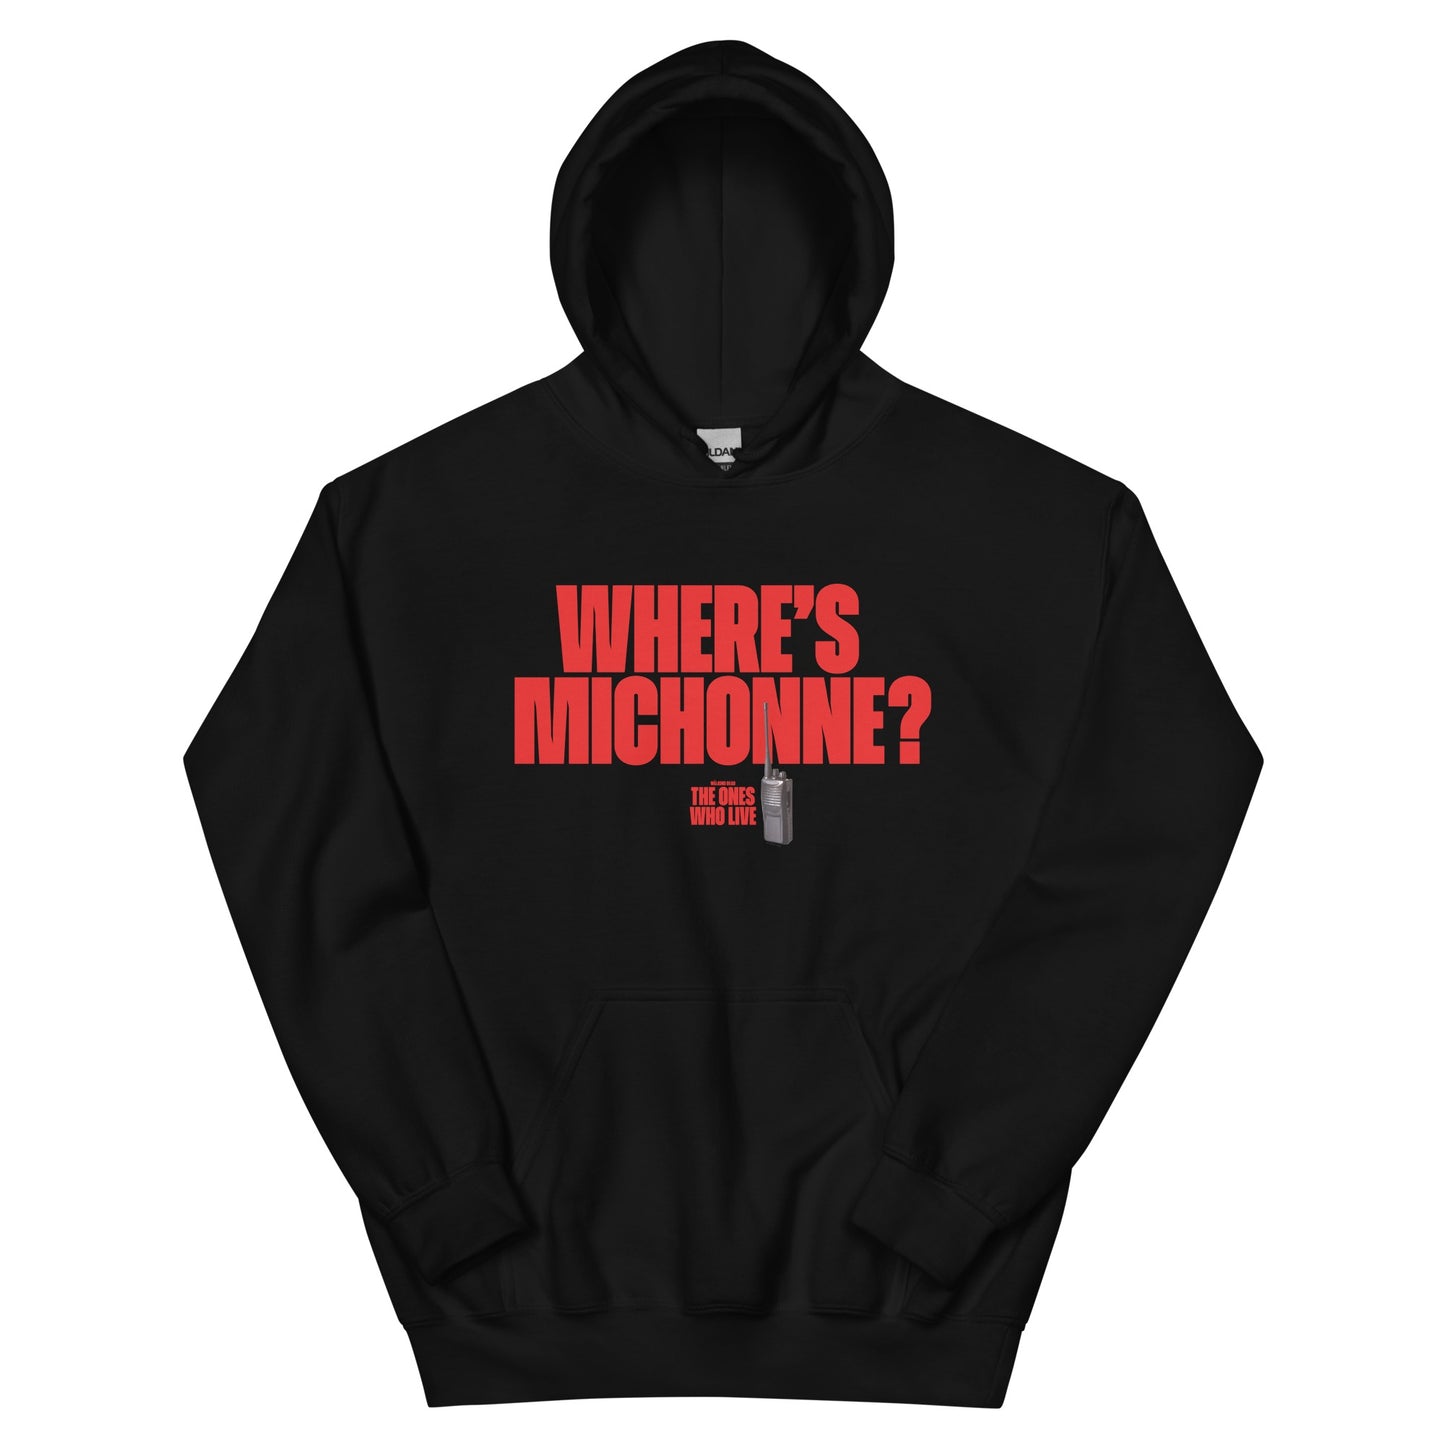 The Walking Dead: The Ones Who Live Where's Michonne? Walkie Adult Hoodie